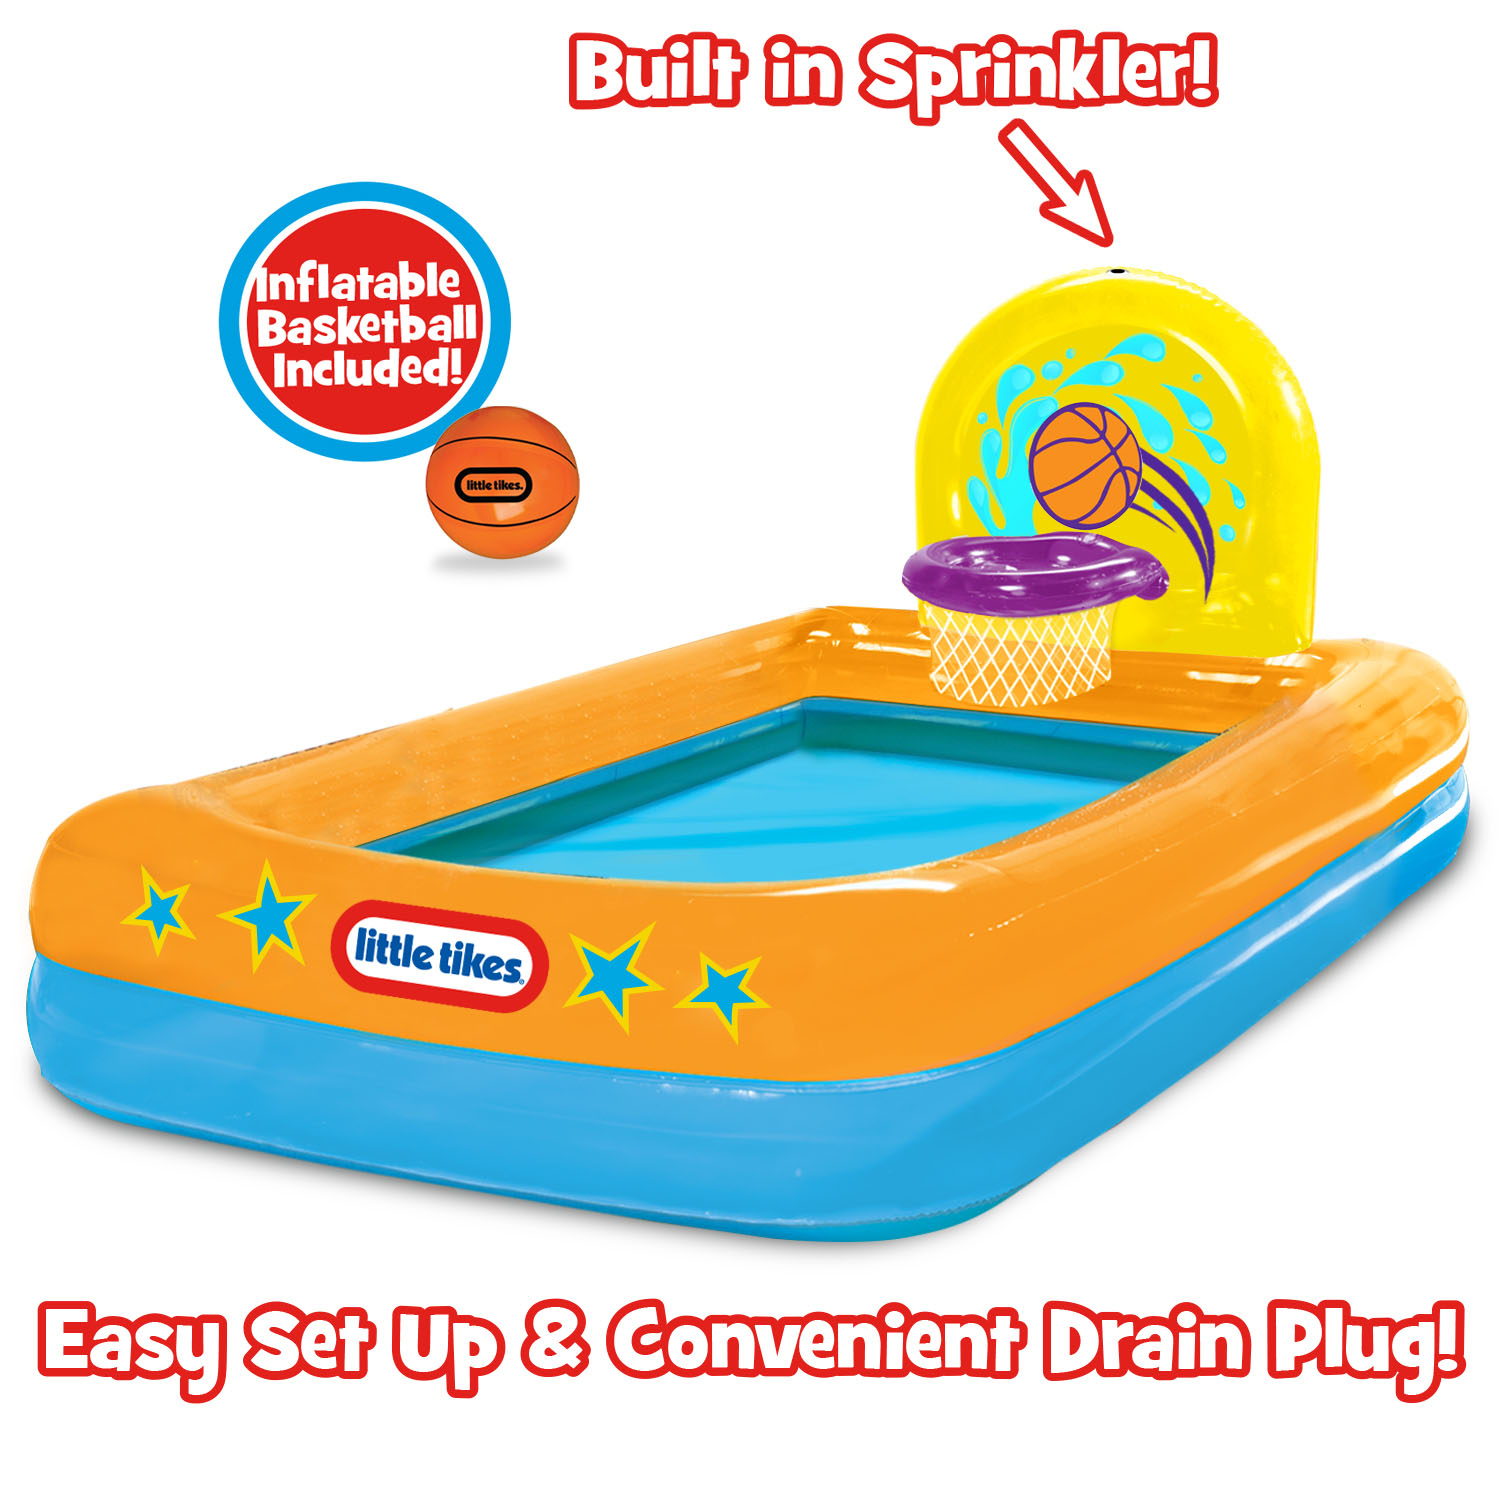 Little Tikes Splash Dunk Sprinkler Pool, Inflatable Pool with Basketball Hoop and Ball for Kids Ages 3-6 - image 3 of 5